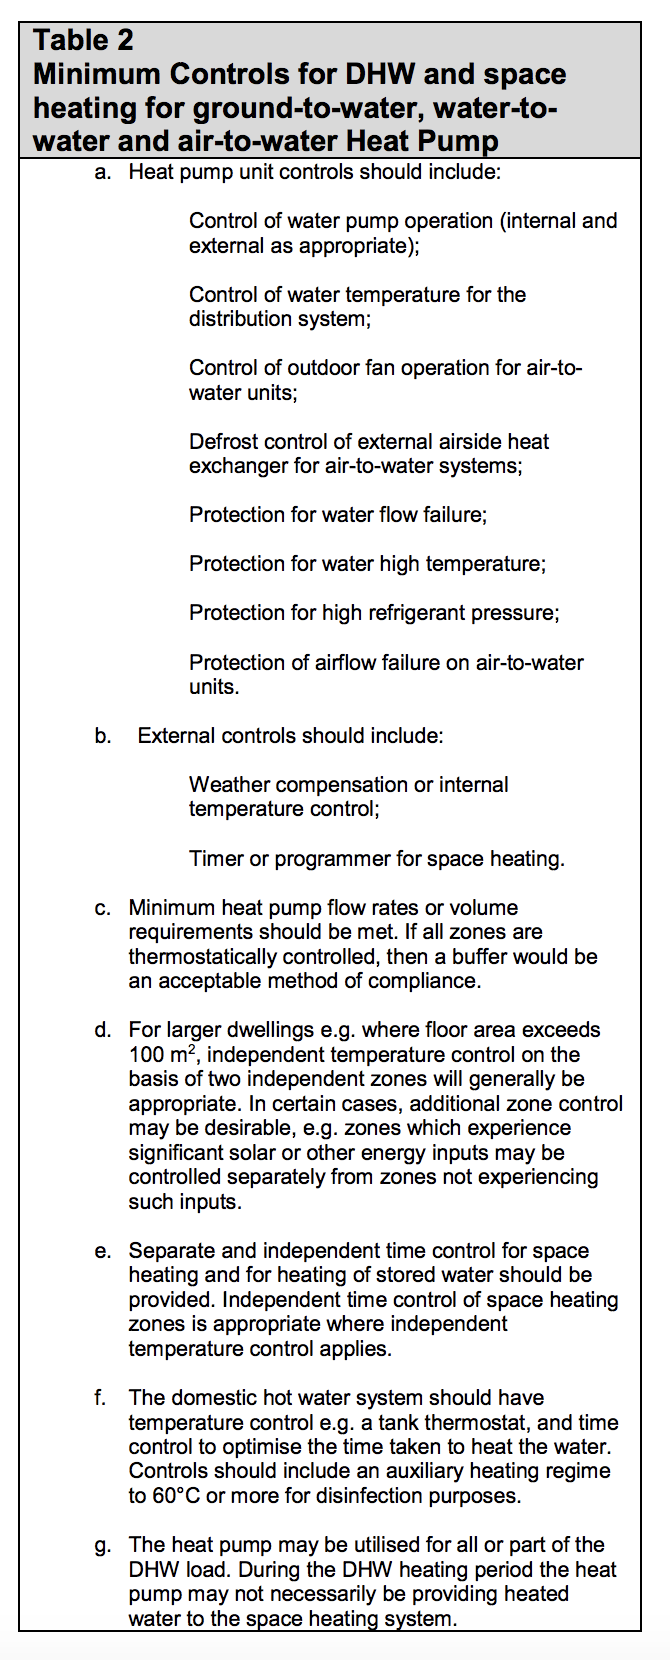 Table HL2 - Minimum controls for DHW and space heating for ground-to-water, water-to-water and air-to-water heat pump - Extract from TGD L